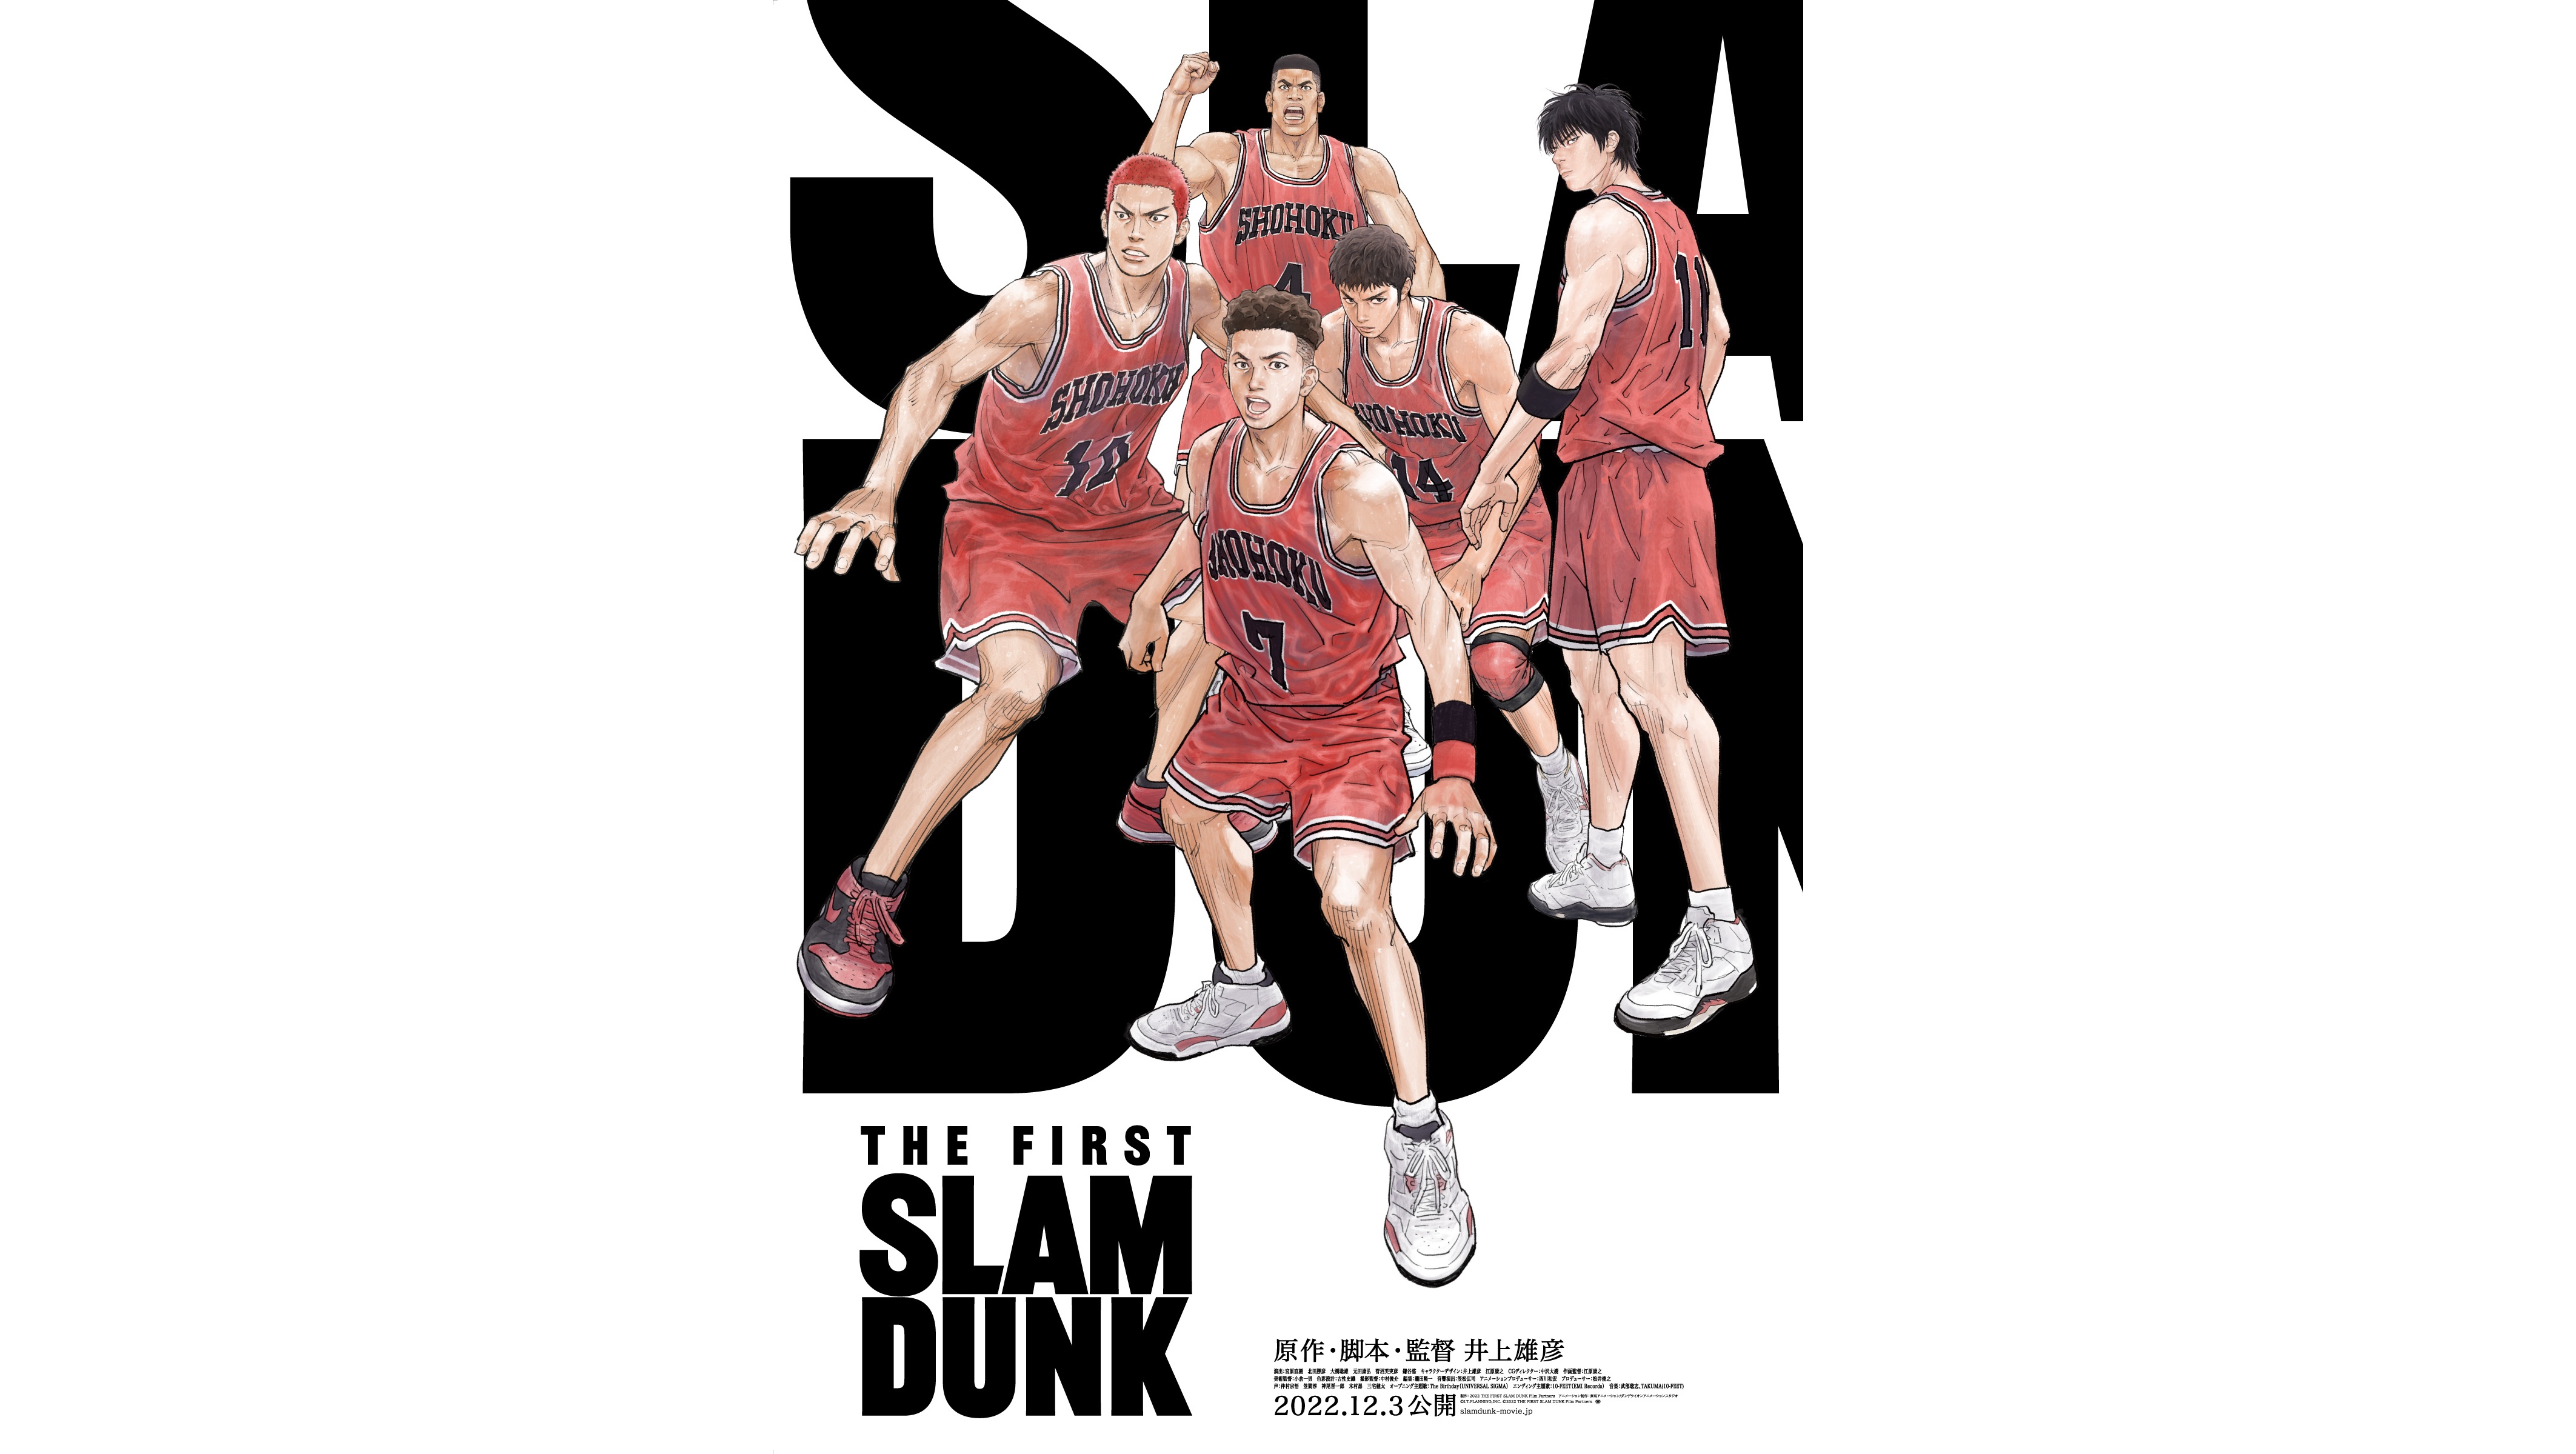 THE FIRST SLAM DUNK Film Reveals Main Cast, Theme Song | MOSHI